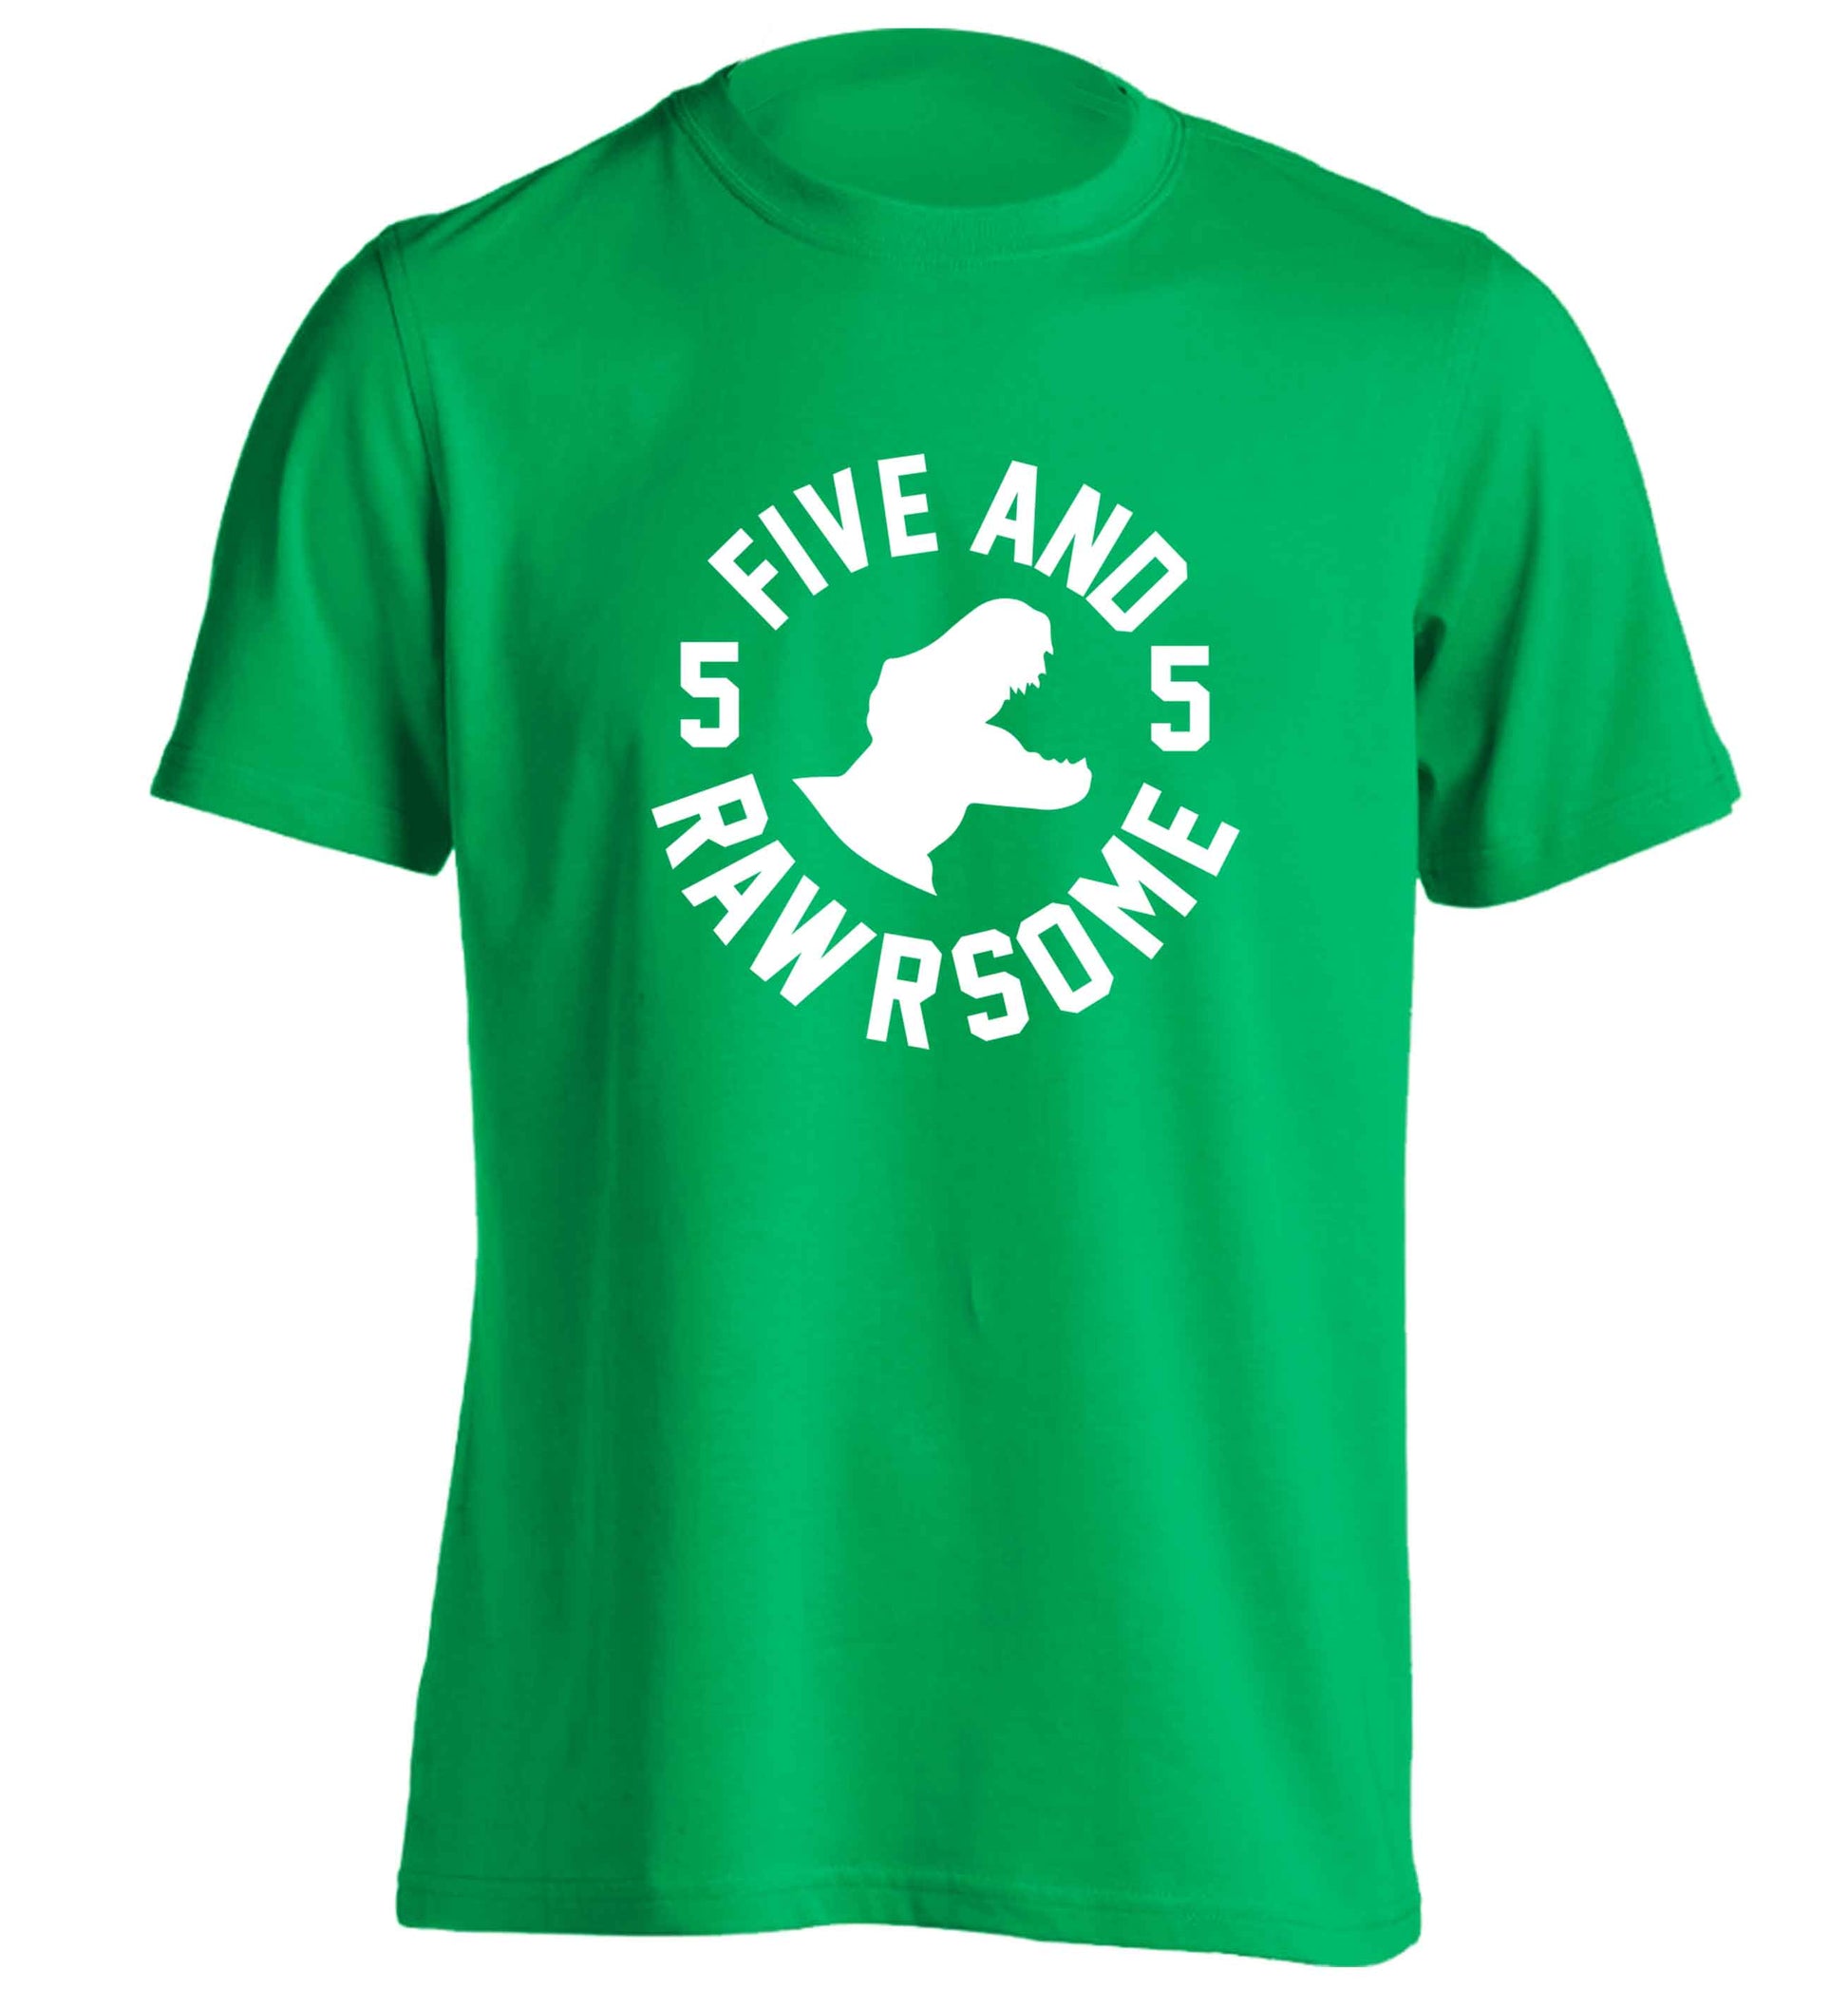 Five and rawrsome adults unisex green Tshirt 2XL